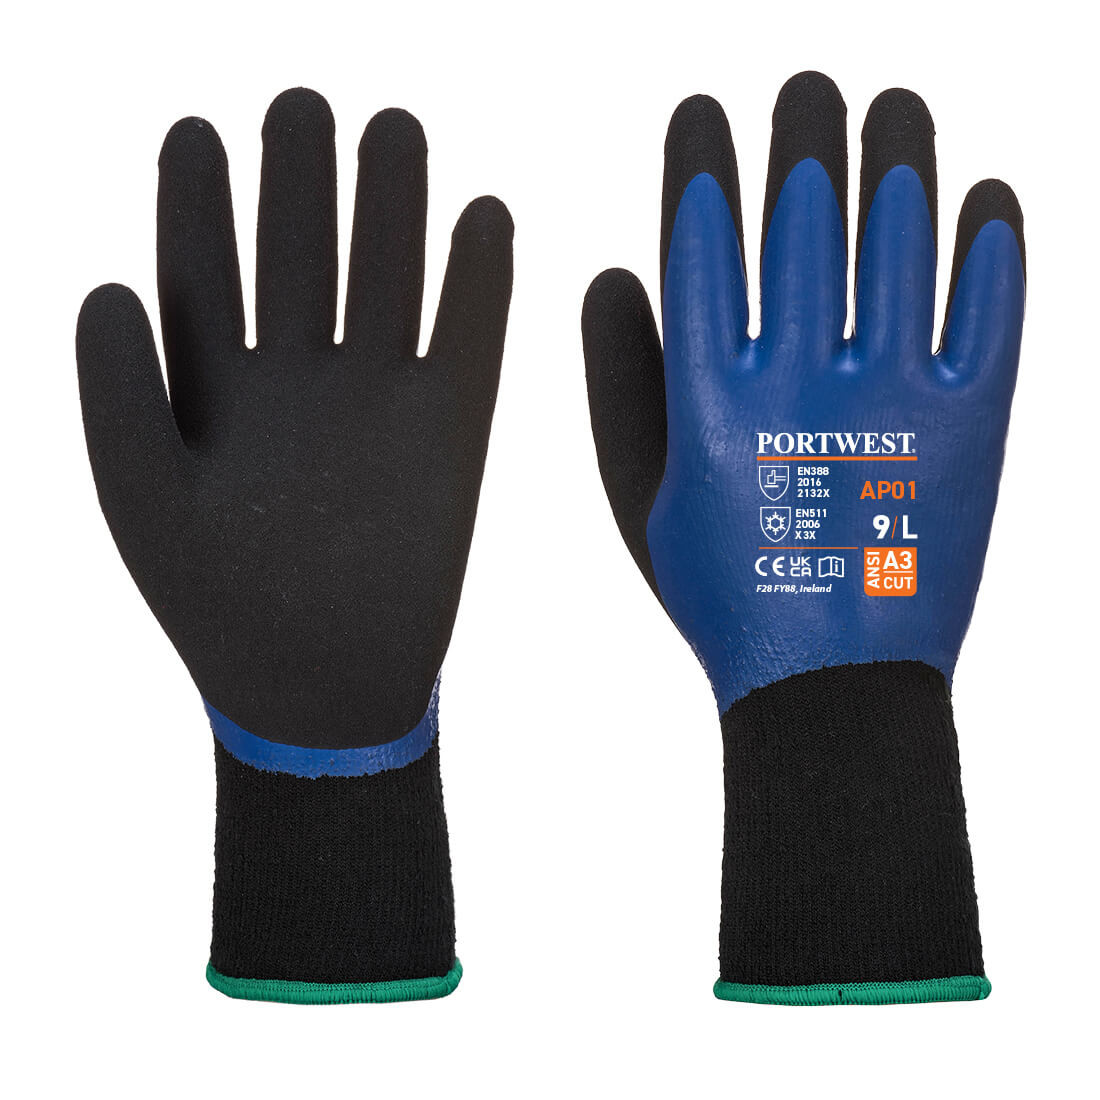 Thermo Pro Glove - Personal protection